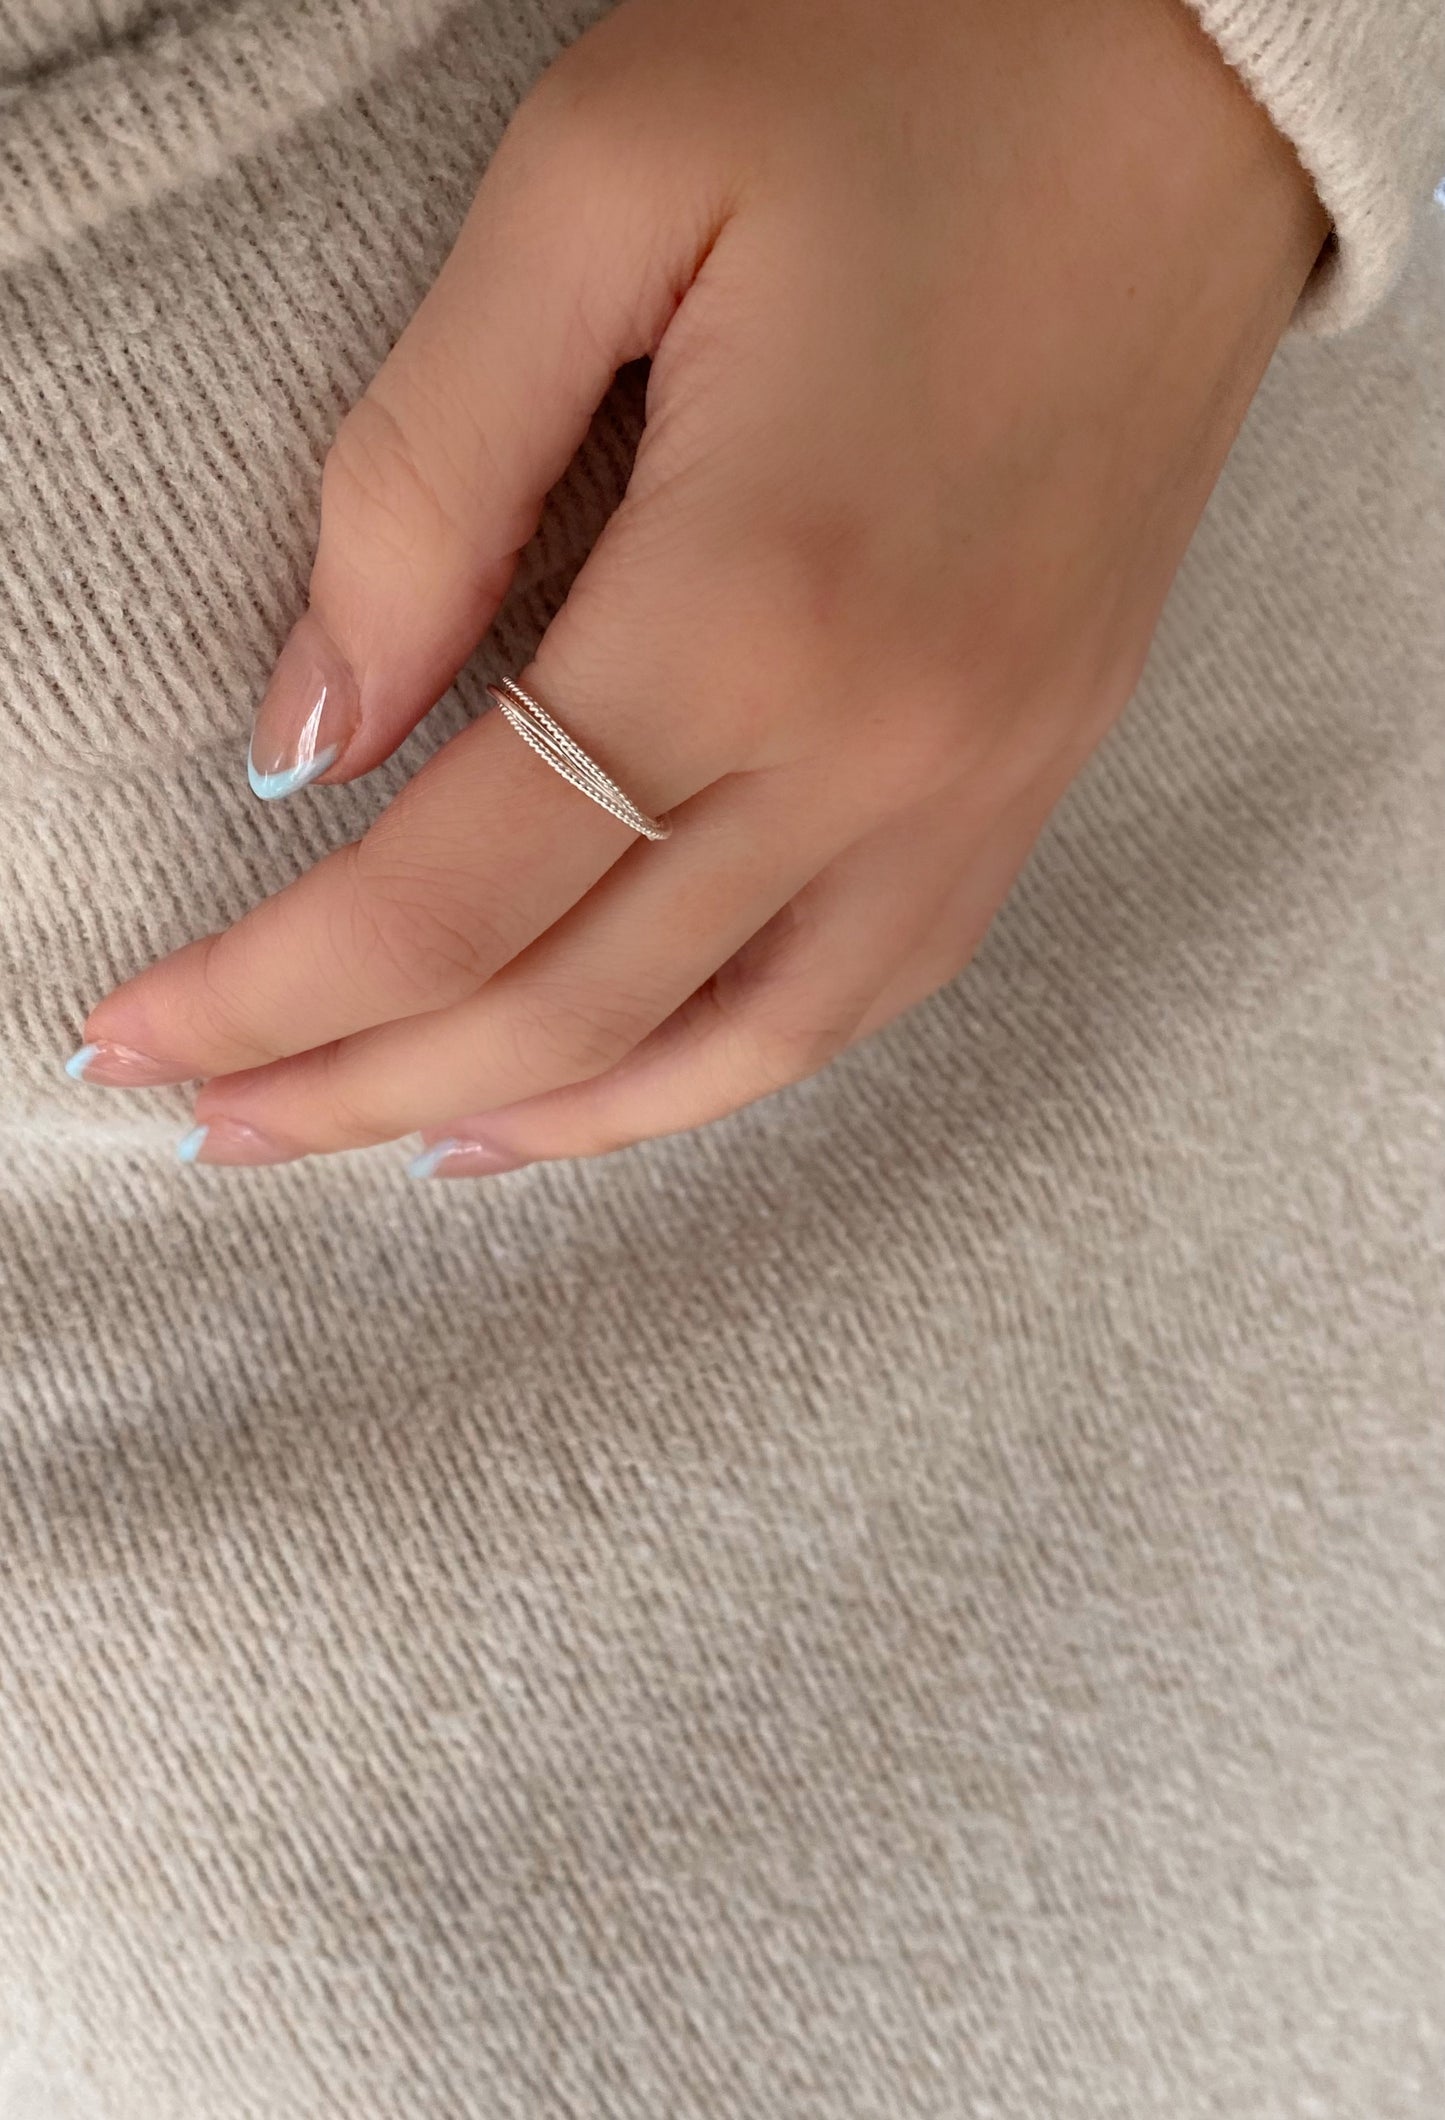 ALLIE - Pure Silvery And Shiny Minimalist Rings ∙ Set Of 3 Sterling Silver Ring  ∙ High Quality Waterproof & Tarnish Free ∙ Thin Band Ring